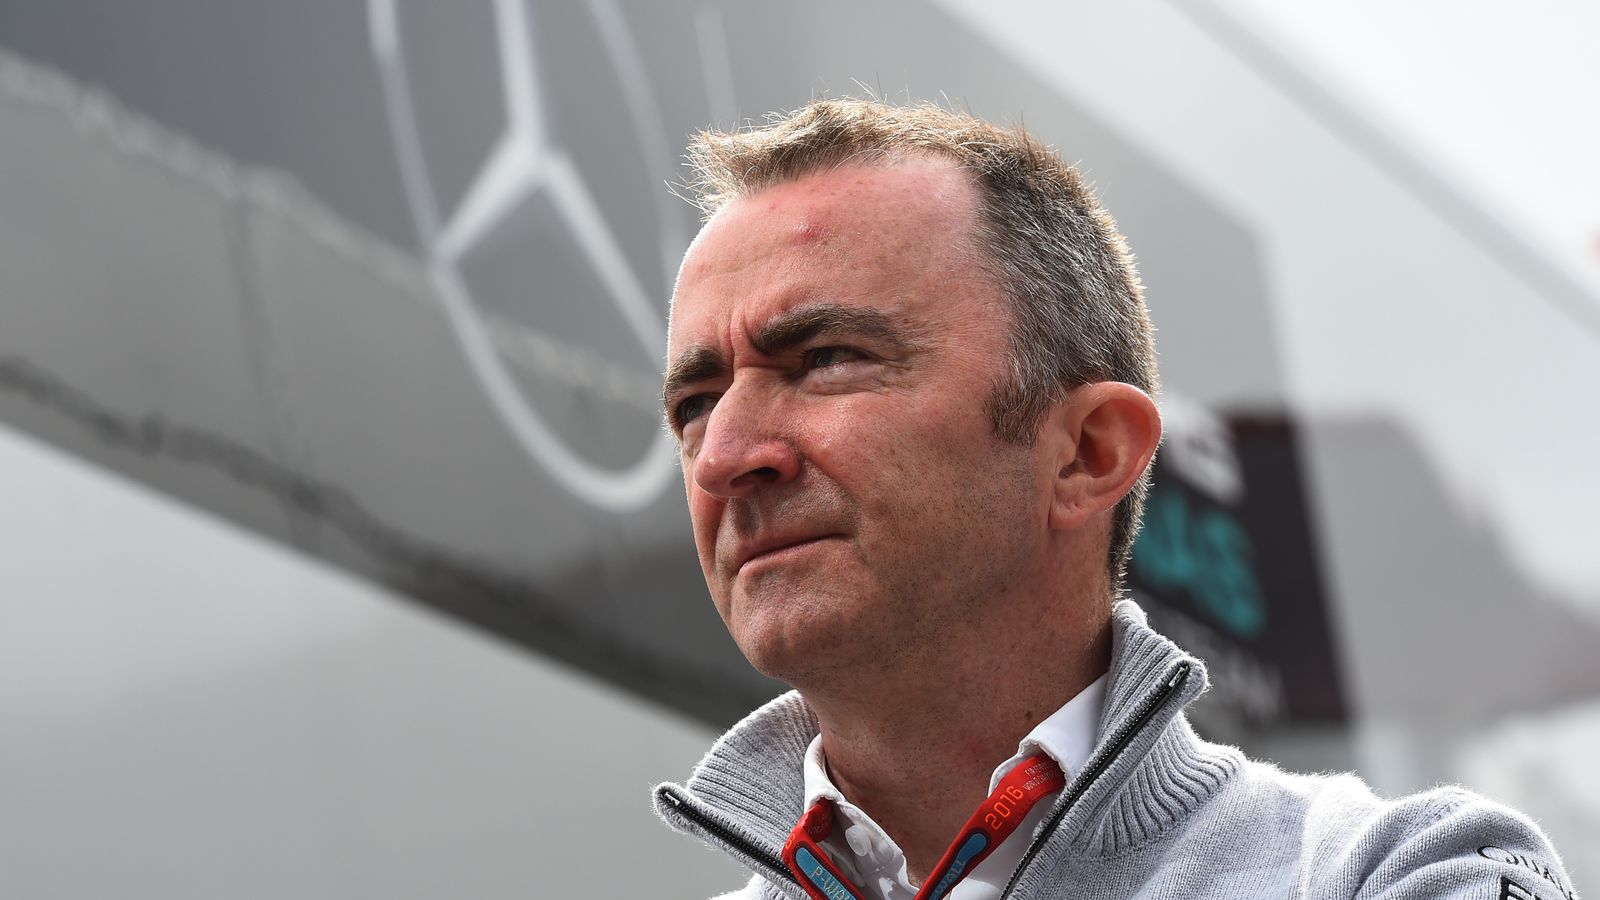 Paddy Lowe leaves Mercedes ahead of expected Williams switch | F1 News